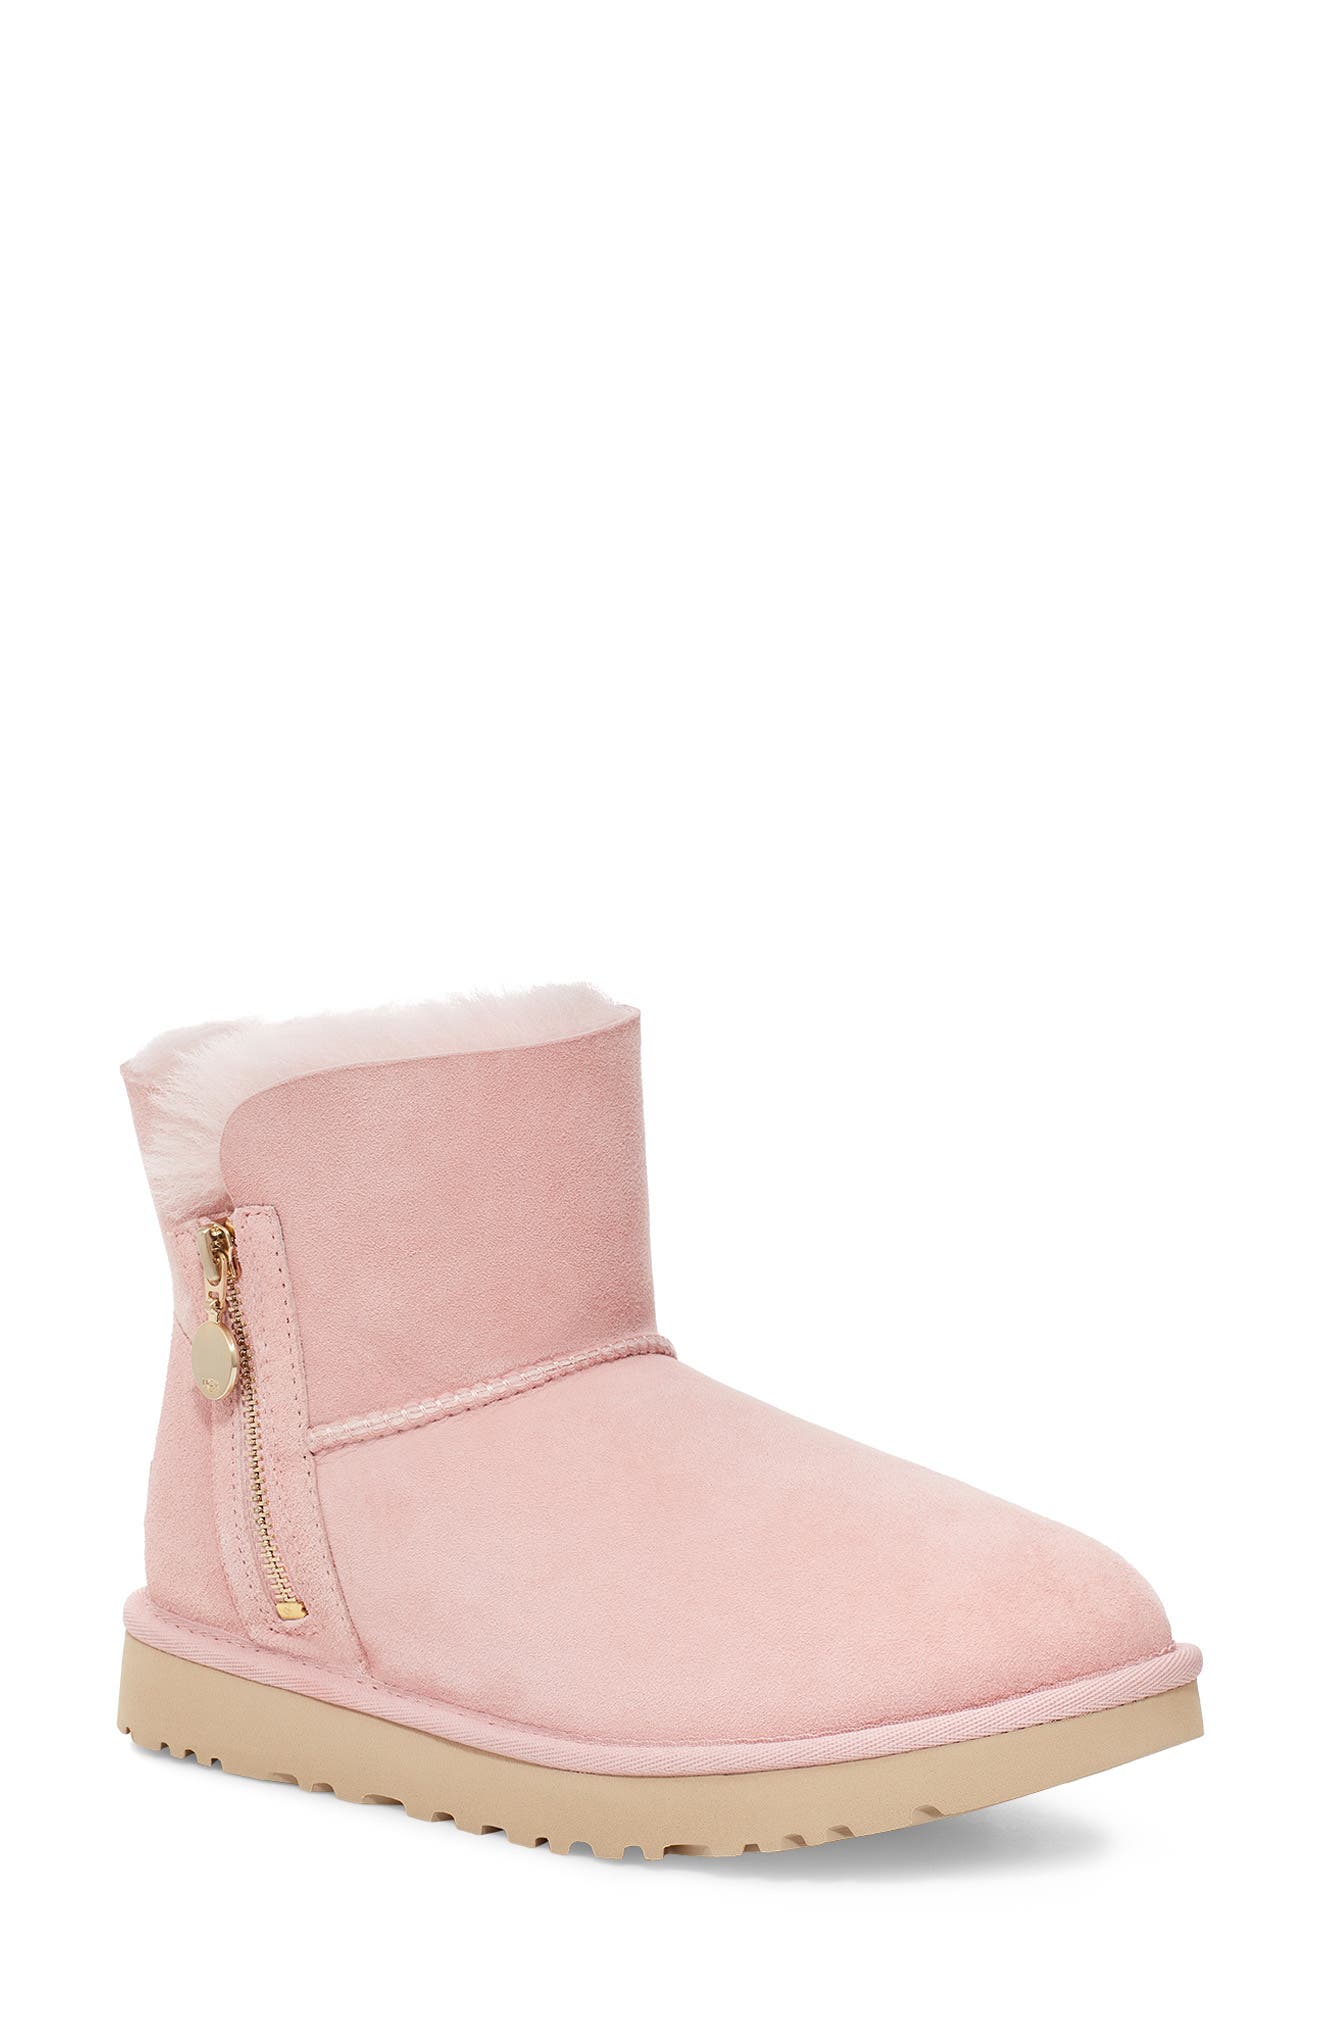 snow boots nordstrom